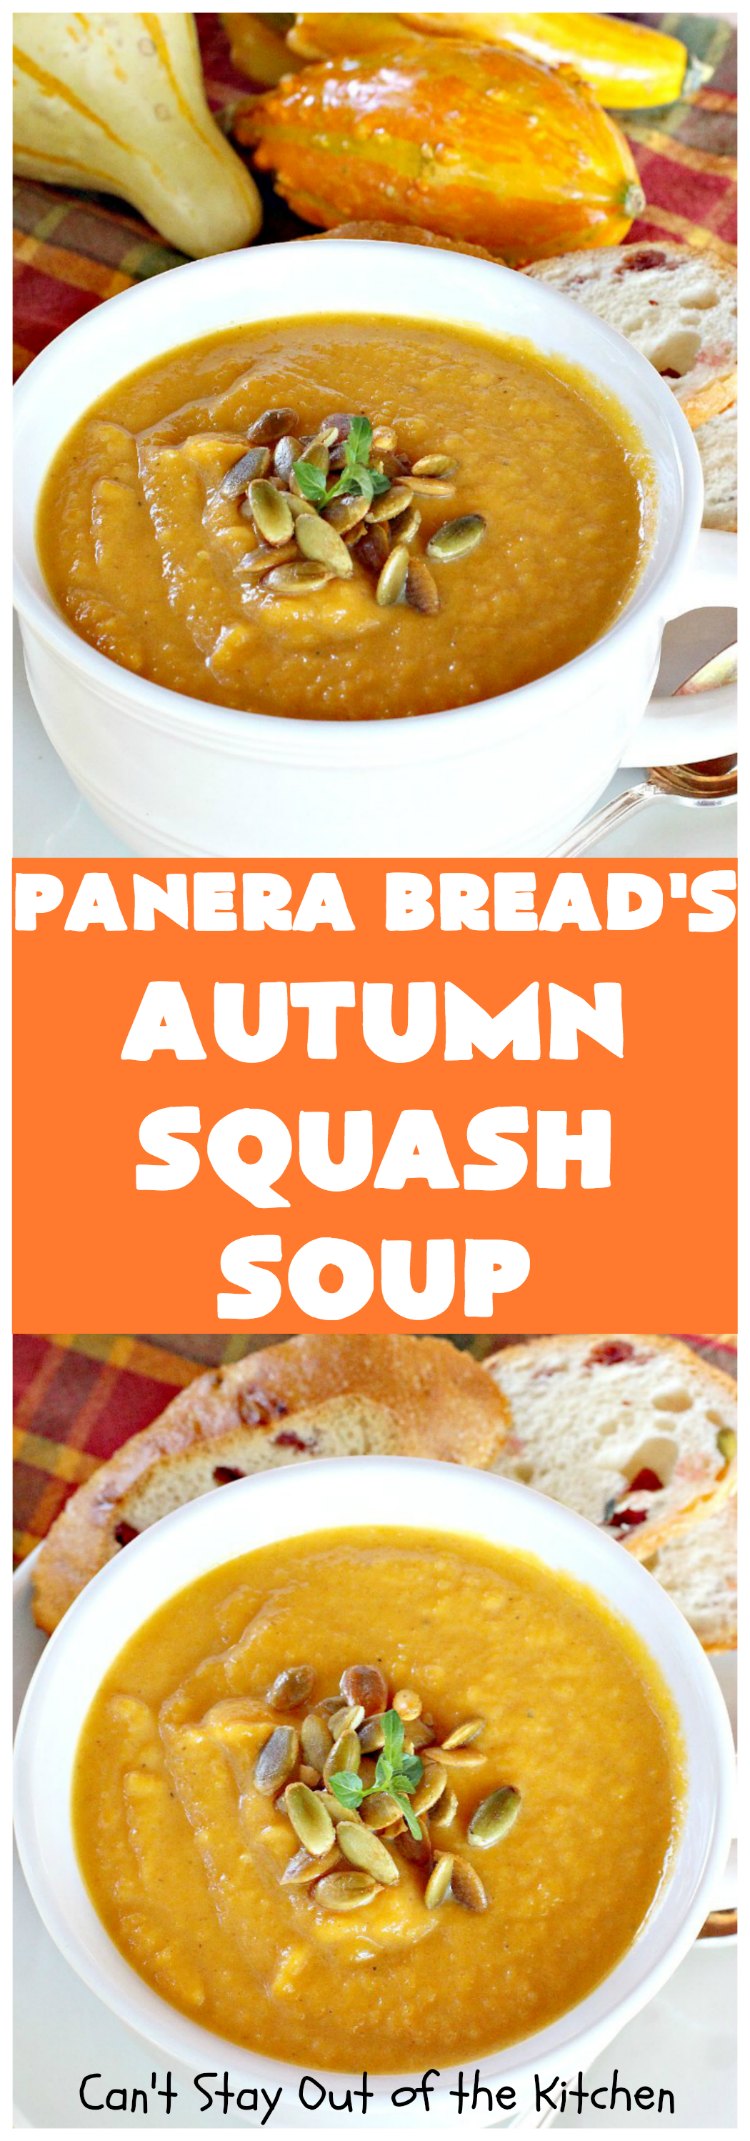 Panera Bread's Autumn Squash Soup | Can't Stay Out of the Kitchen